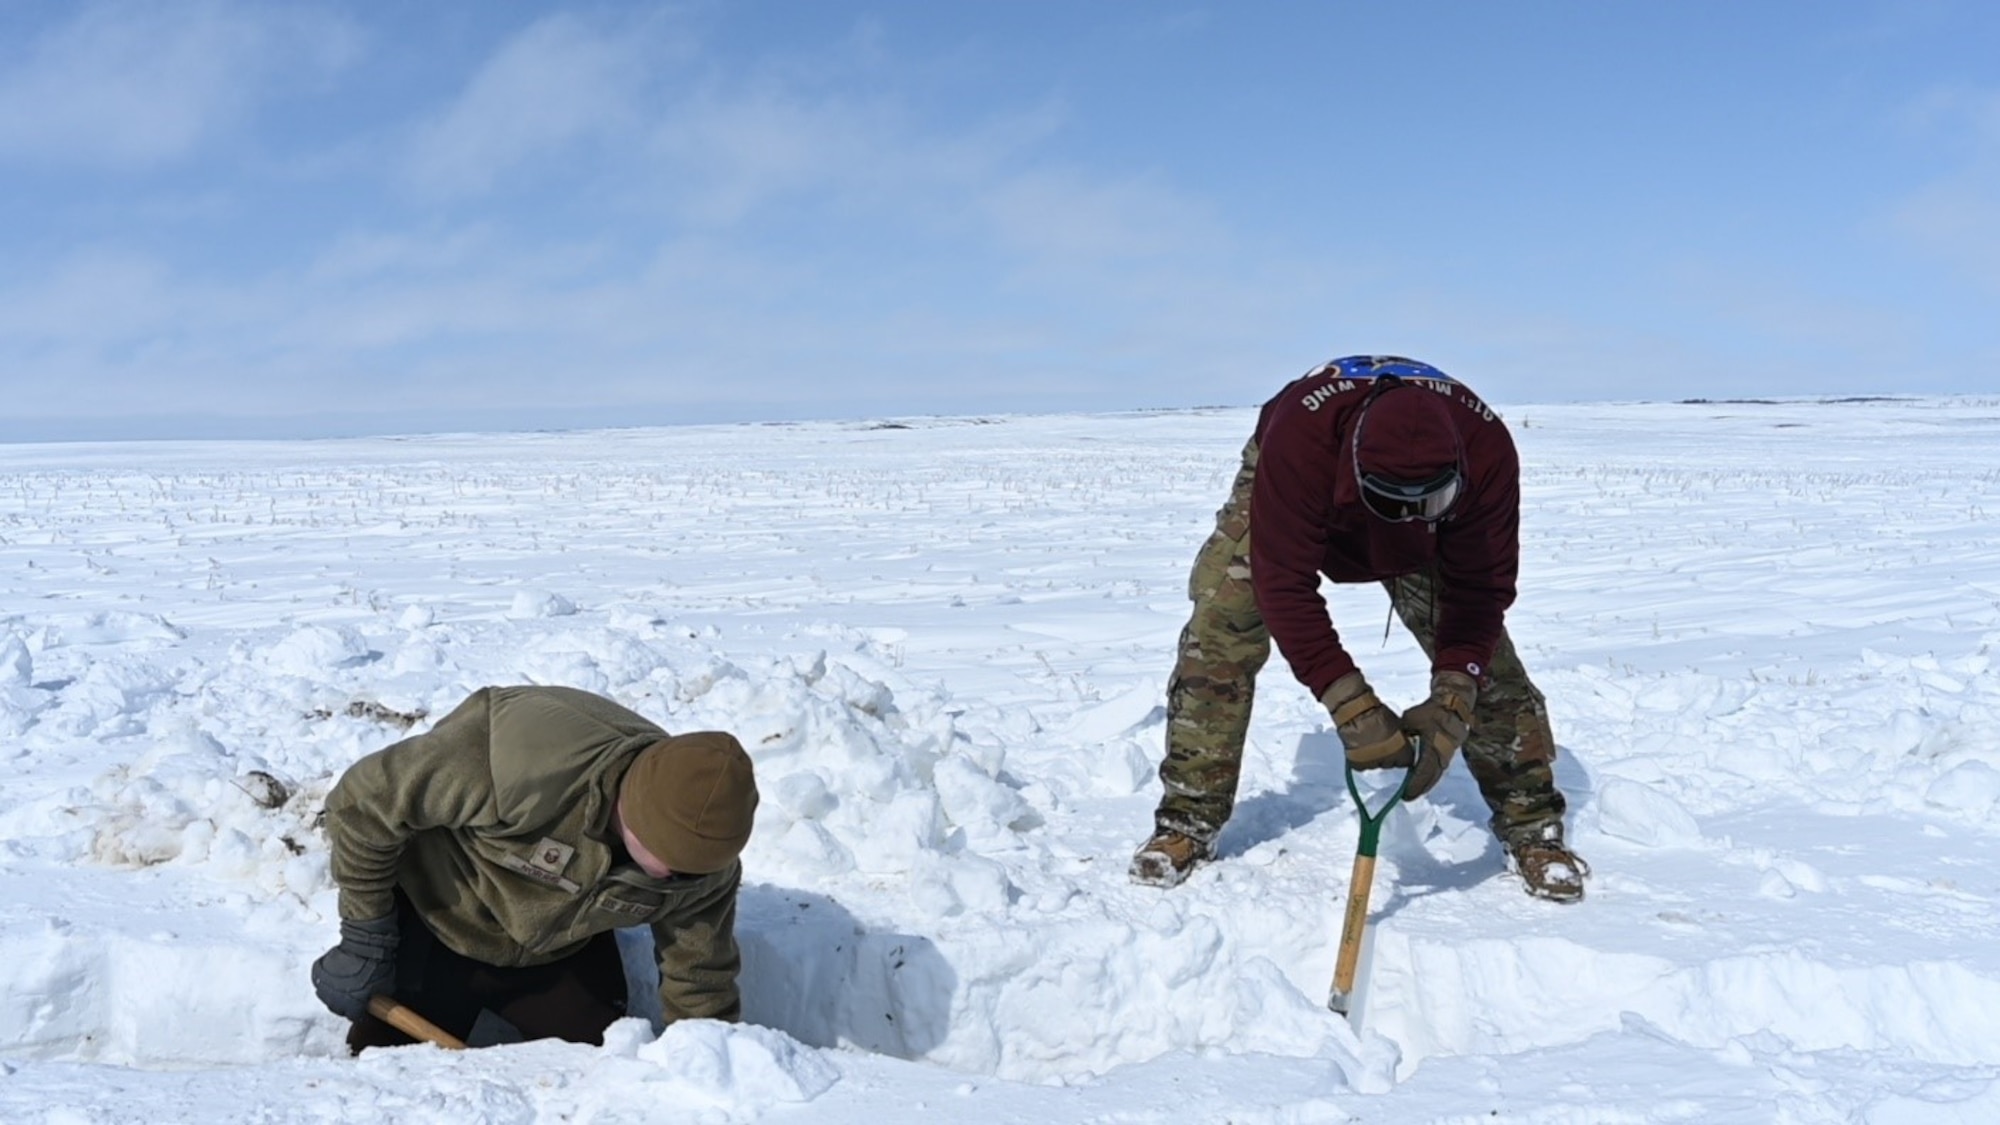 Airmen dig a trench April 26, 2022 at Minot Air Force Base, North Dakota. They shoveled over two feet of snow to prepare for the possible flooding from the melting snow. (U.S. Air Force photo by Senior Airman Caleb Kimmell)